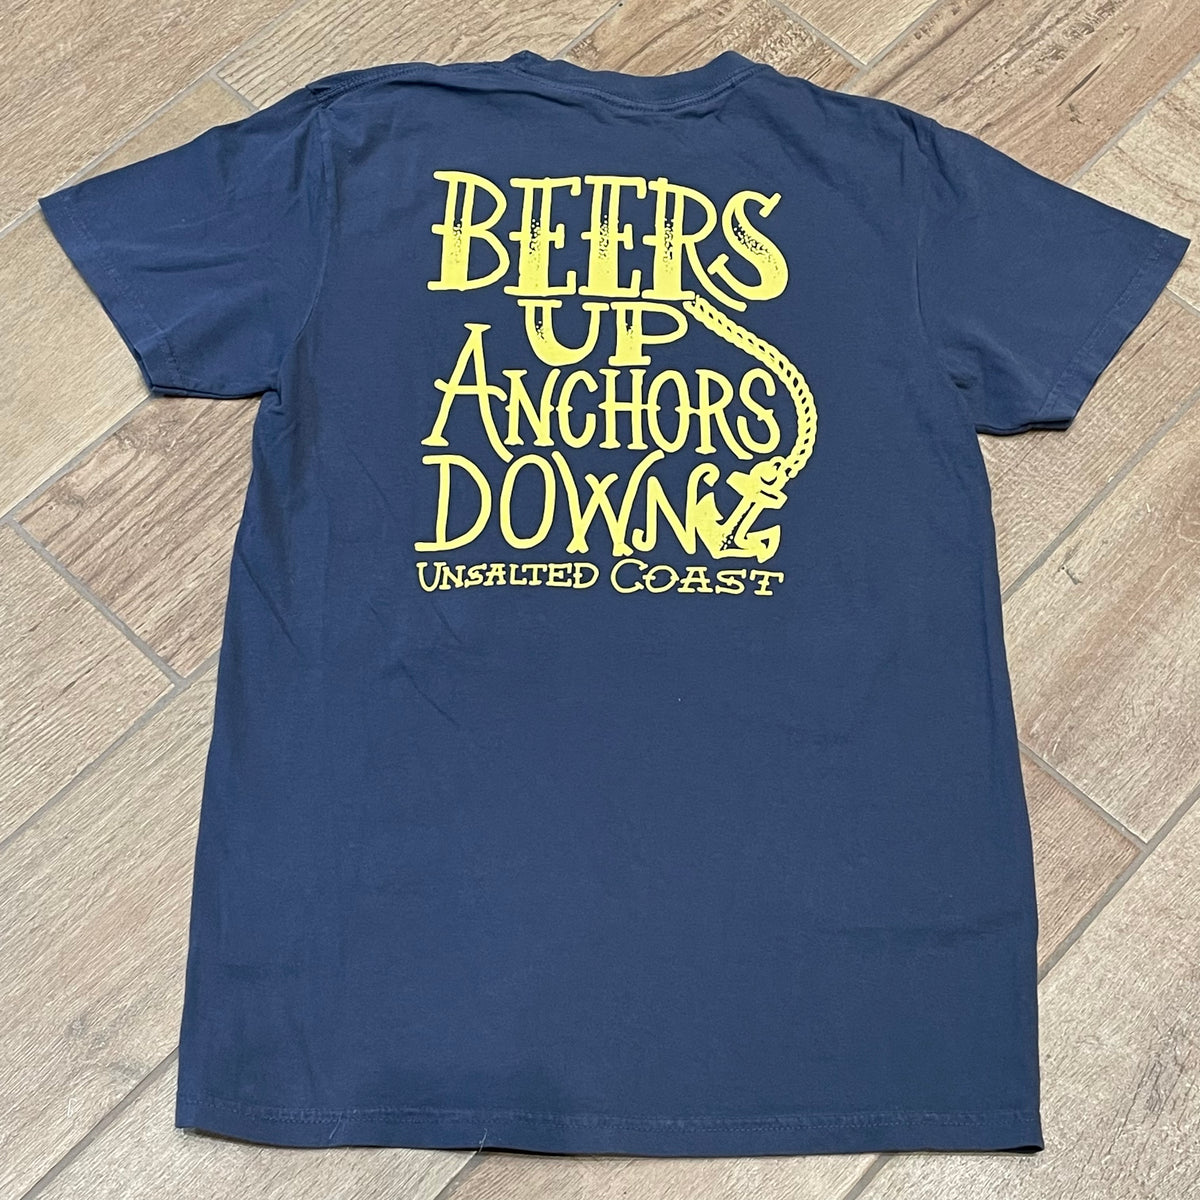 UC Beers Up Anchors Down TShirt